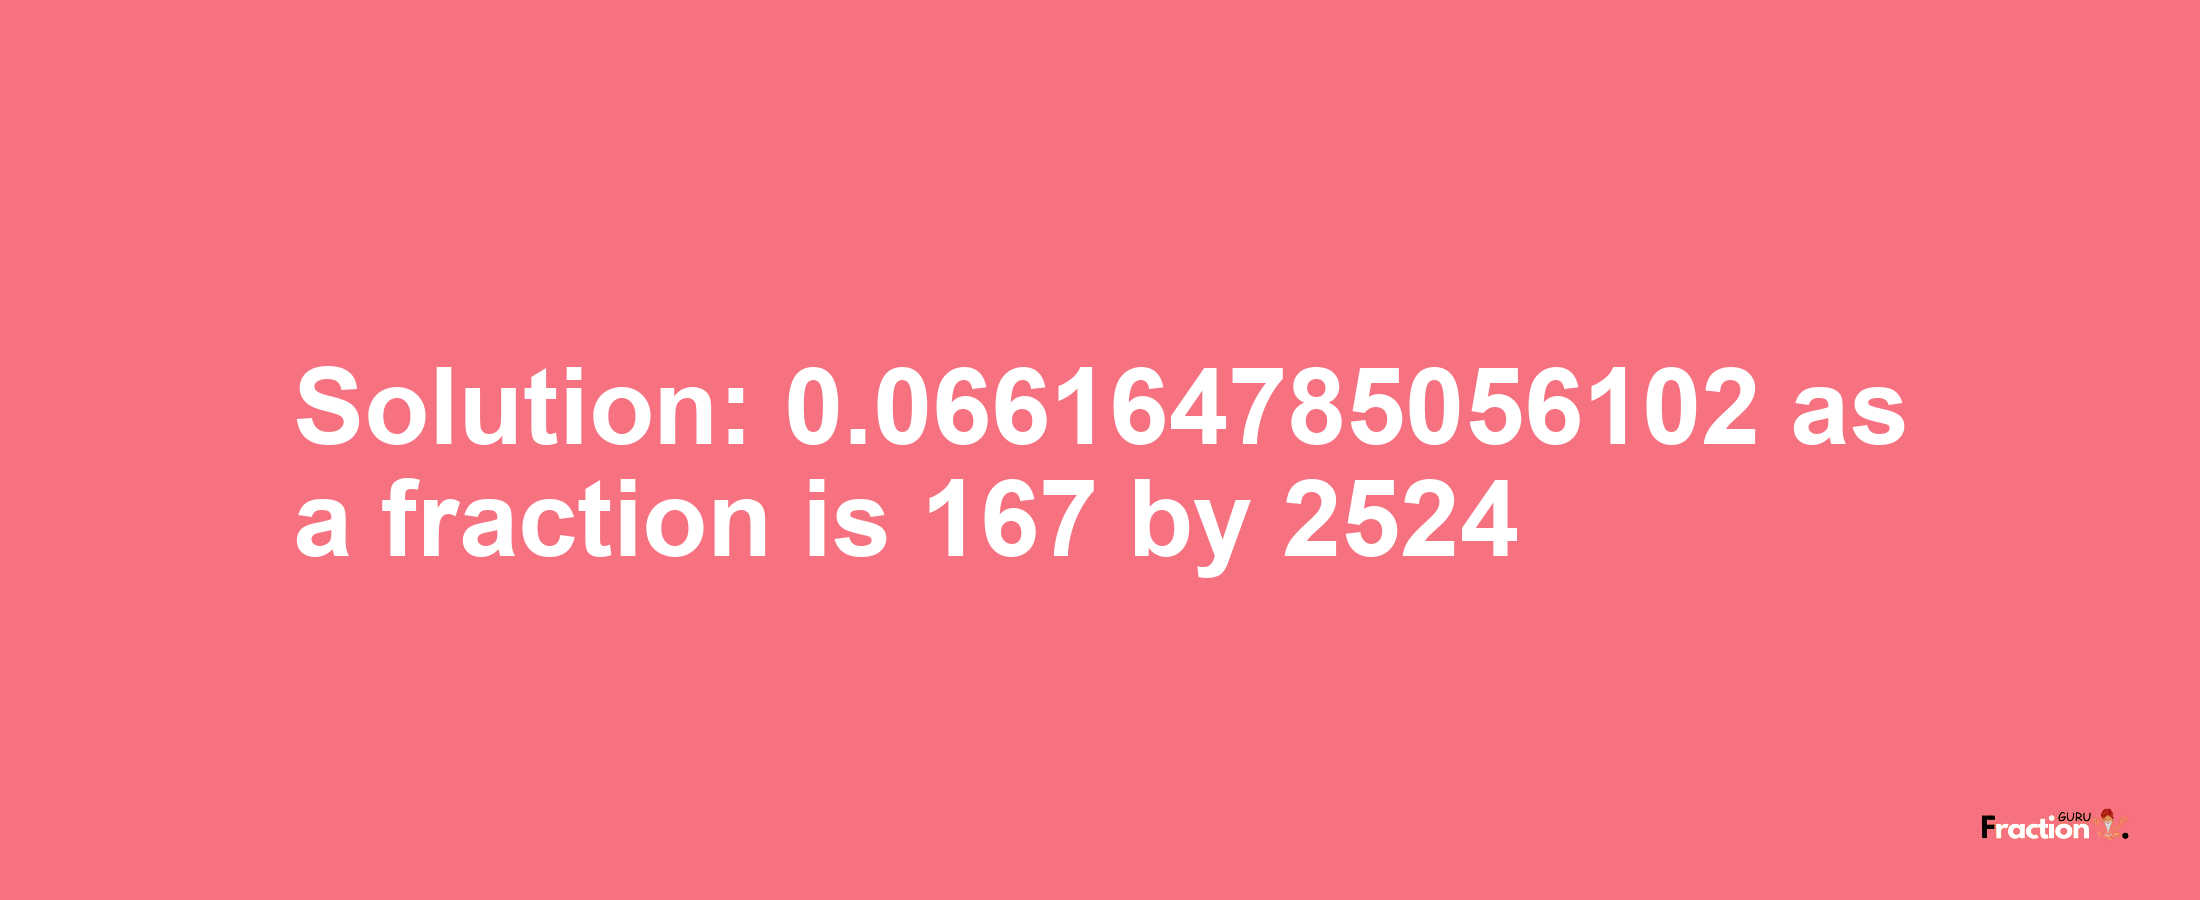 Solution:0.066164785056102 as a fraction is 167/2524